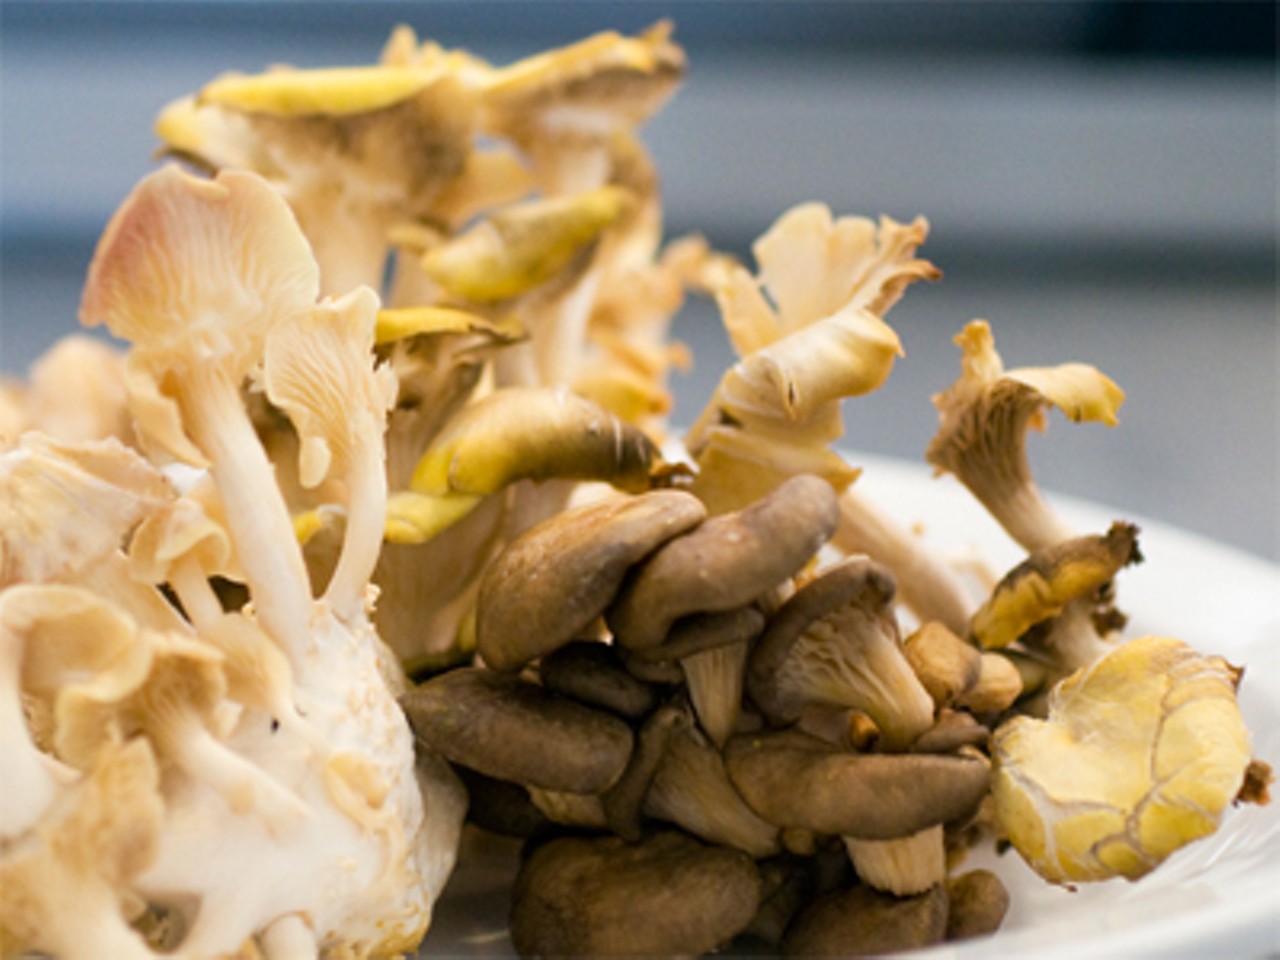 Mushrooms brought in fresh from Ozark Forest Mushrooms. Read Ian Froeb's review: "Plant Power: Local Harvest Caf&ecirc; embodies a welcome new concept in sustainable chowing-down."